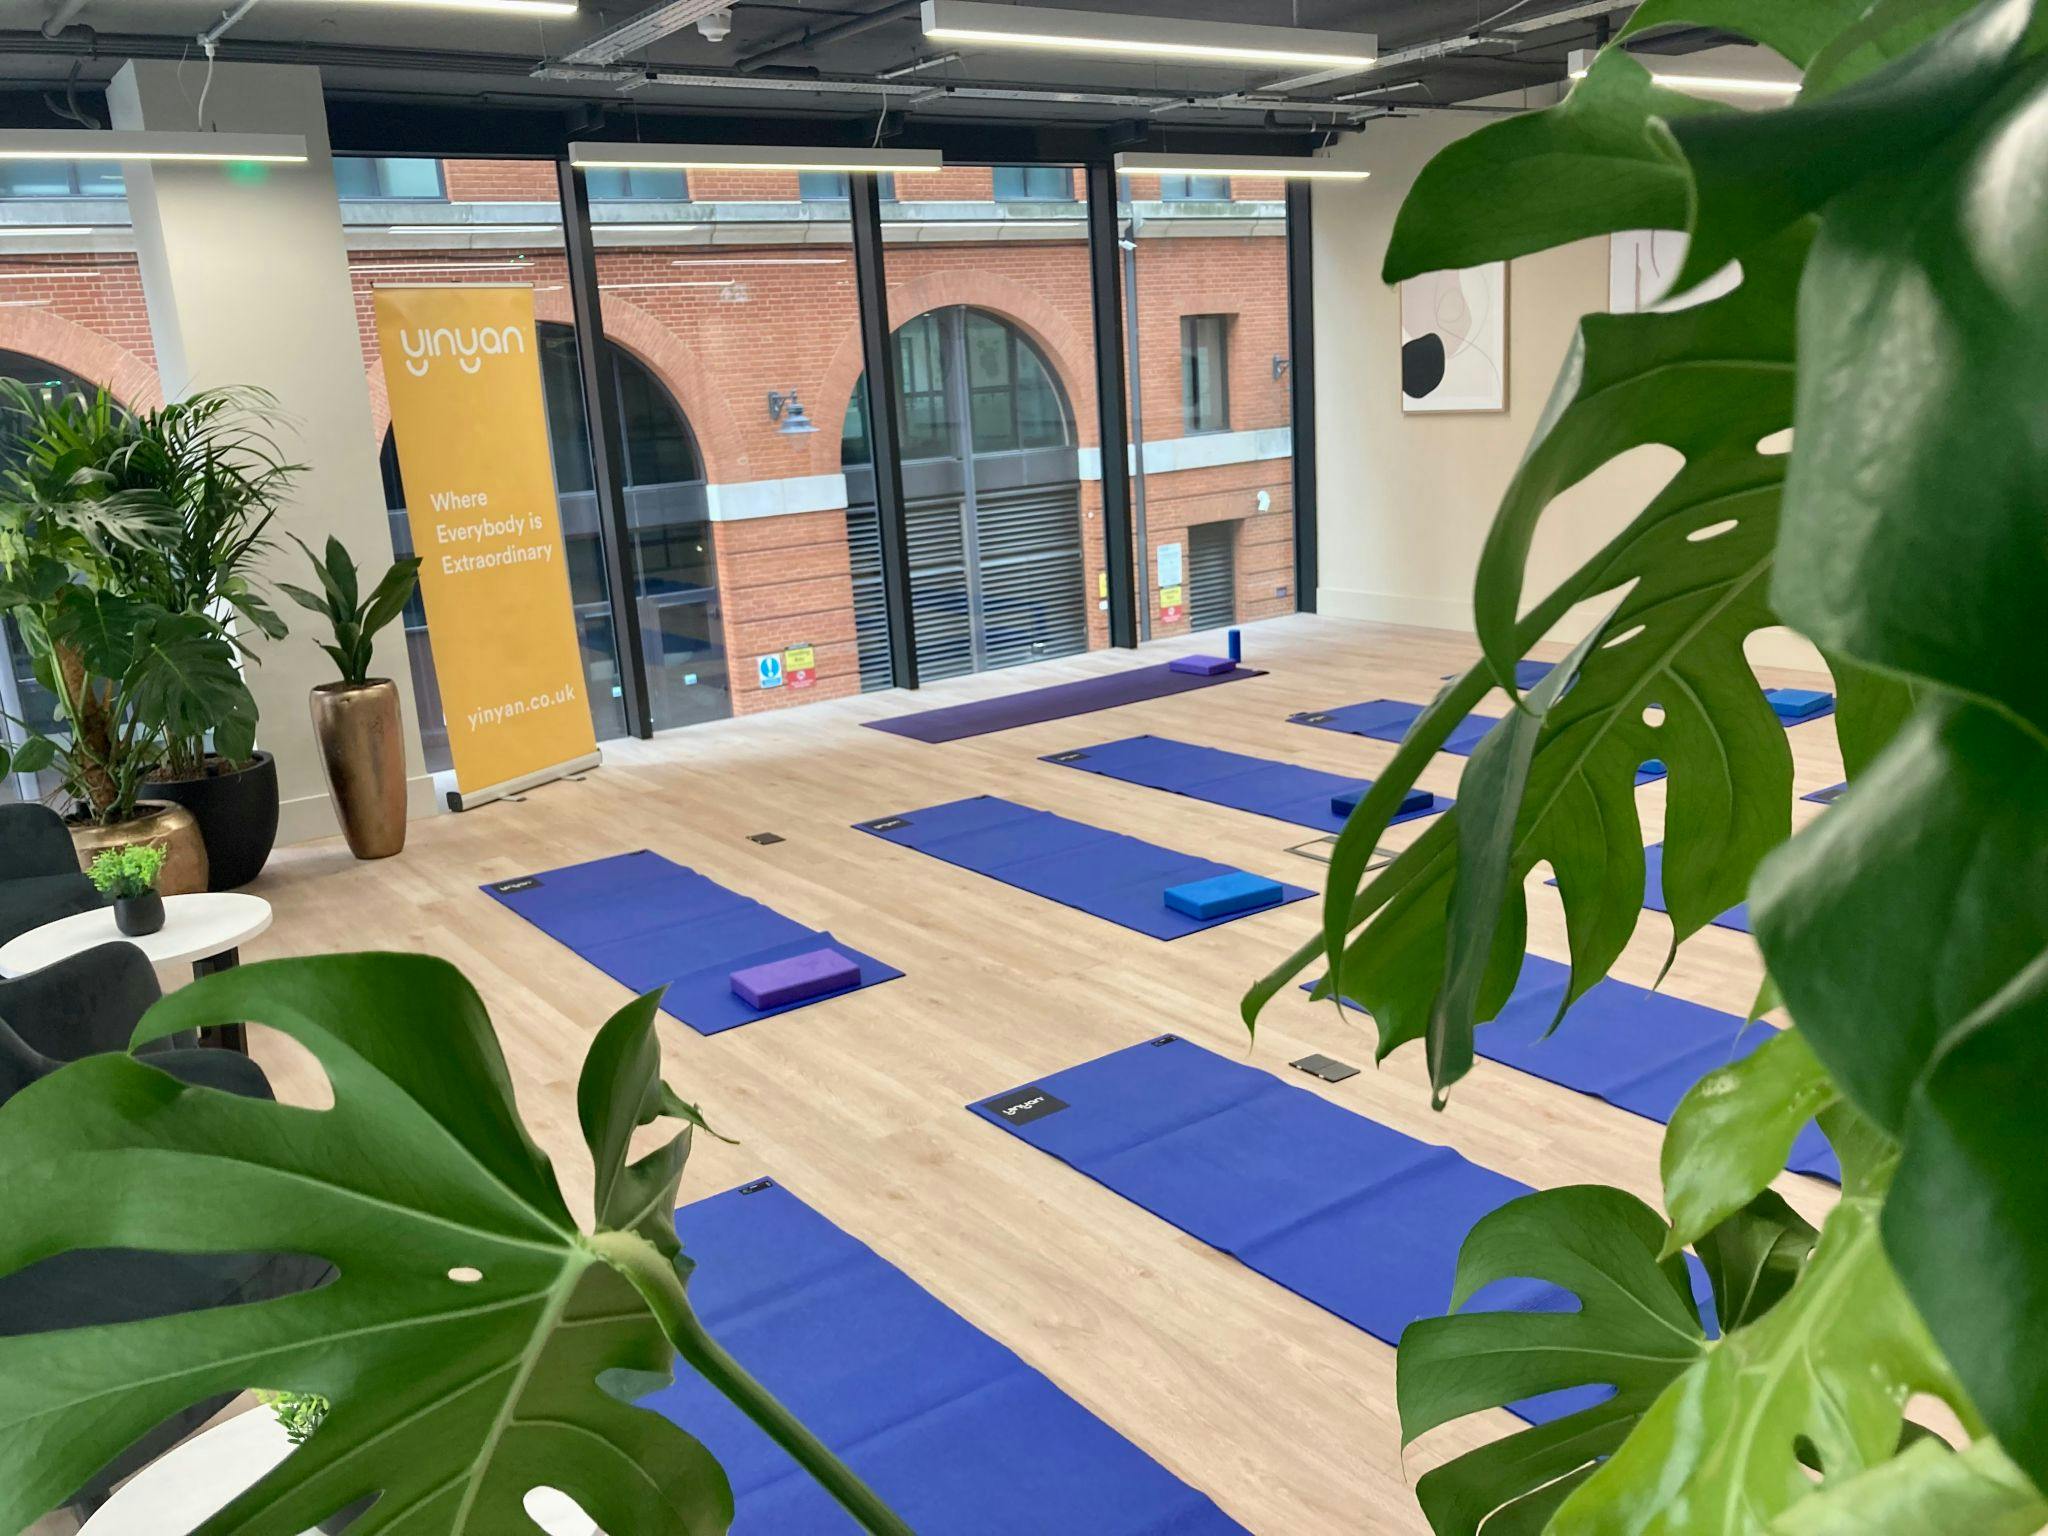 How Eleven Brindleyplace supports tenant wellbeing